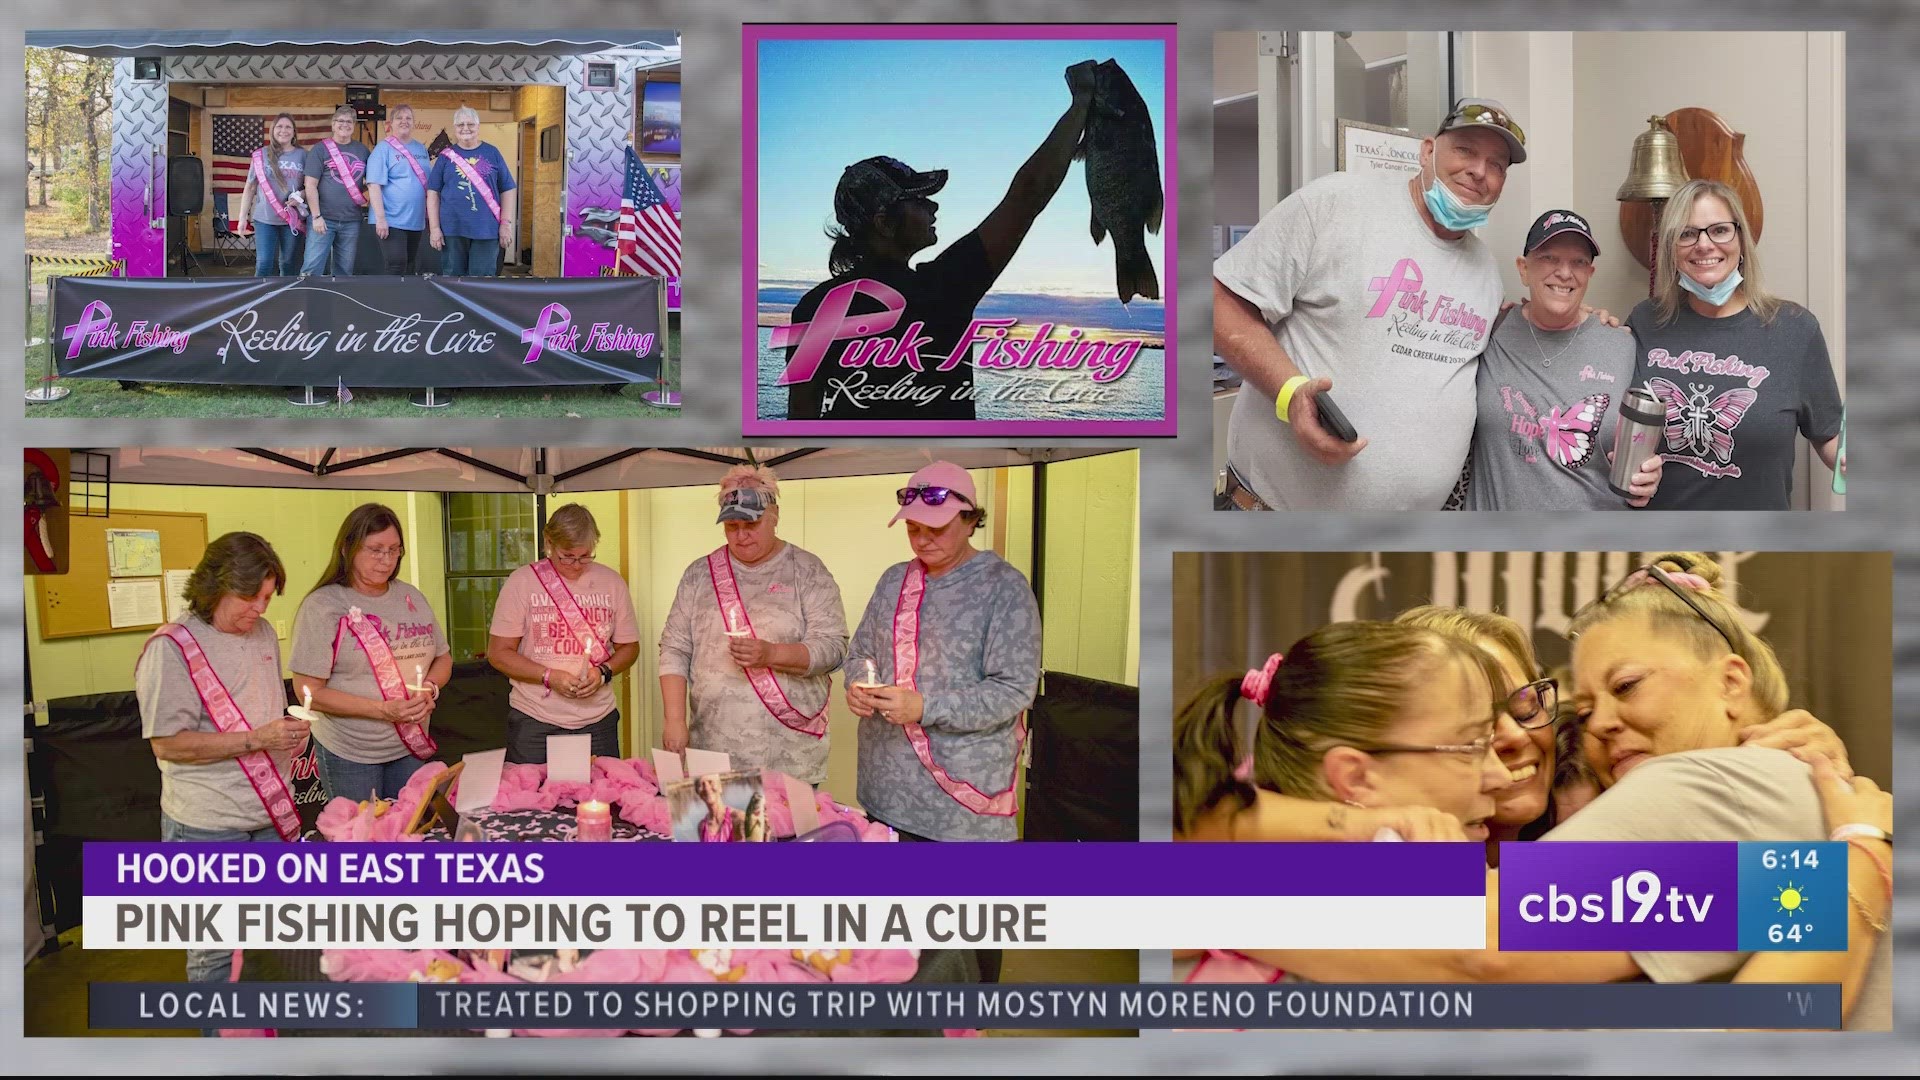 Hooked on East Texas introduces breast cancer group Pink Fishing